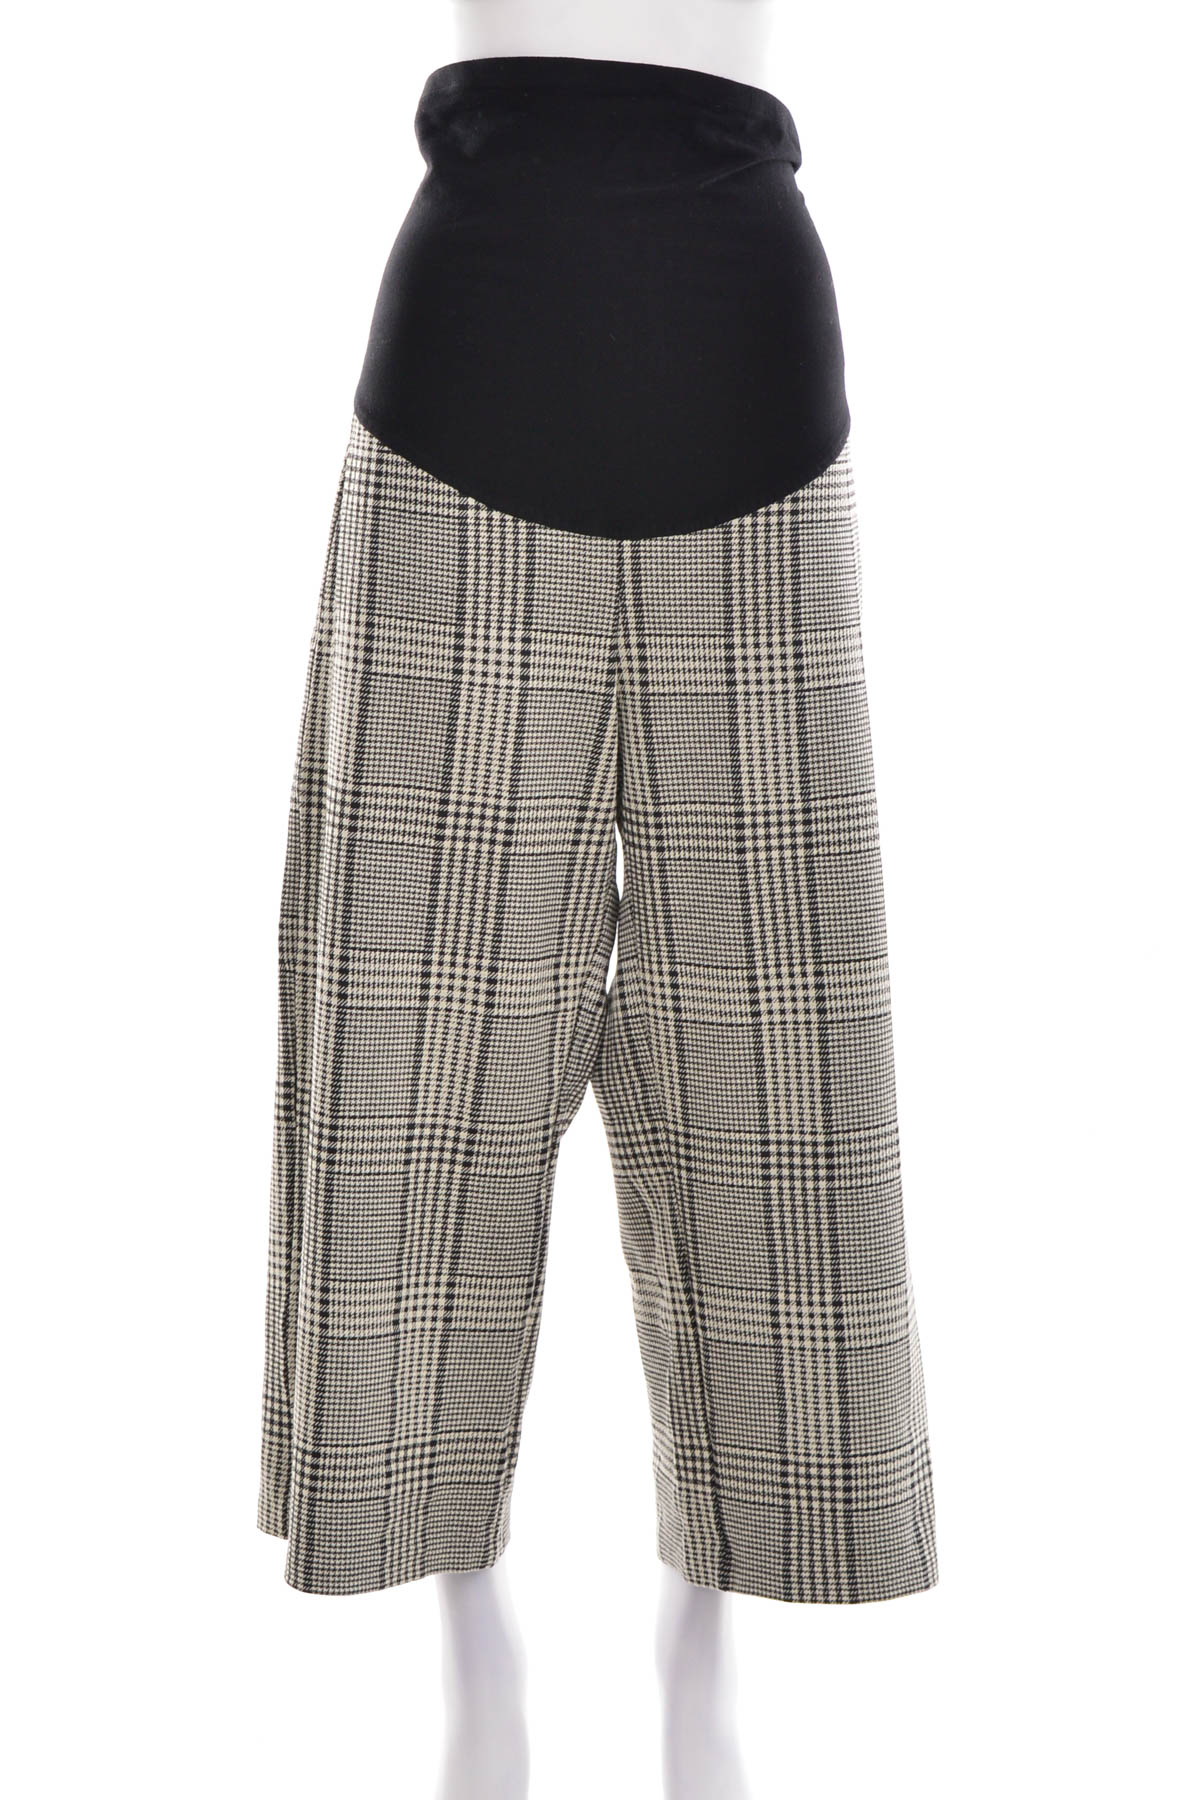 Women's trousers for pregnant women - H&M MAMA - 0